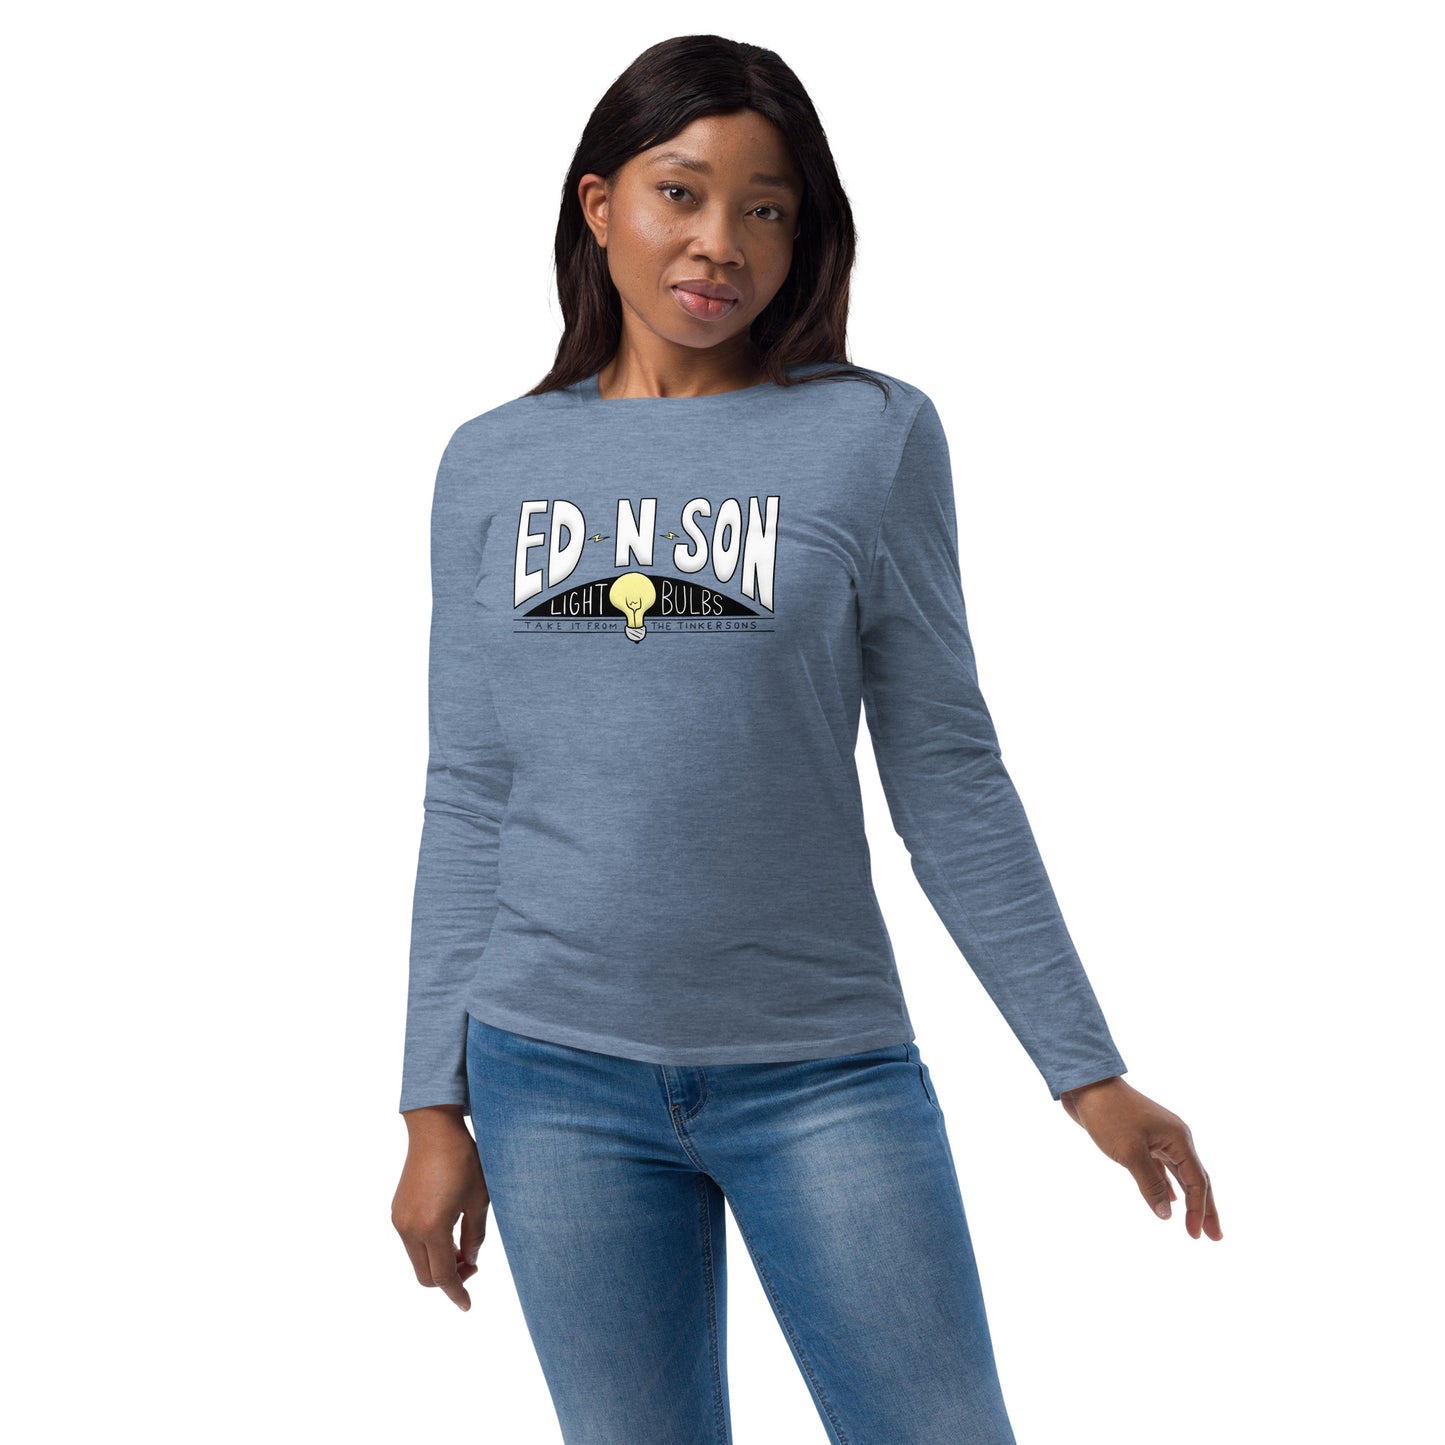 TAKE IT FROM THE TINKERSONS Unisex ED-N-SON Long Sleeve Tee